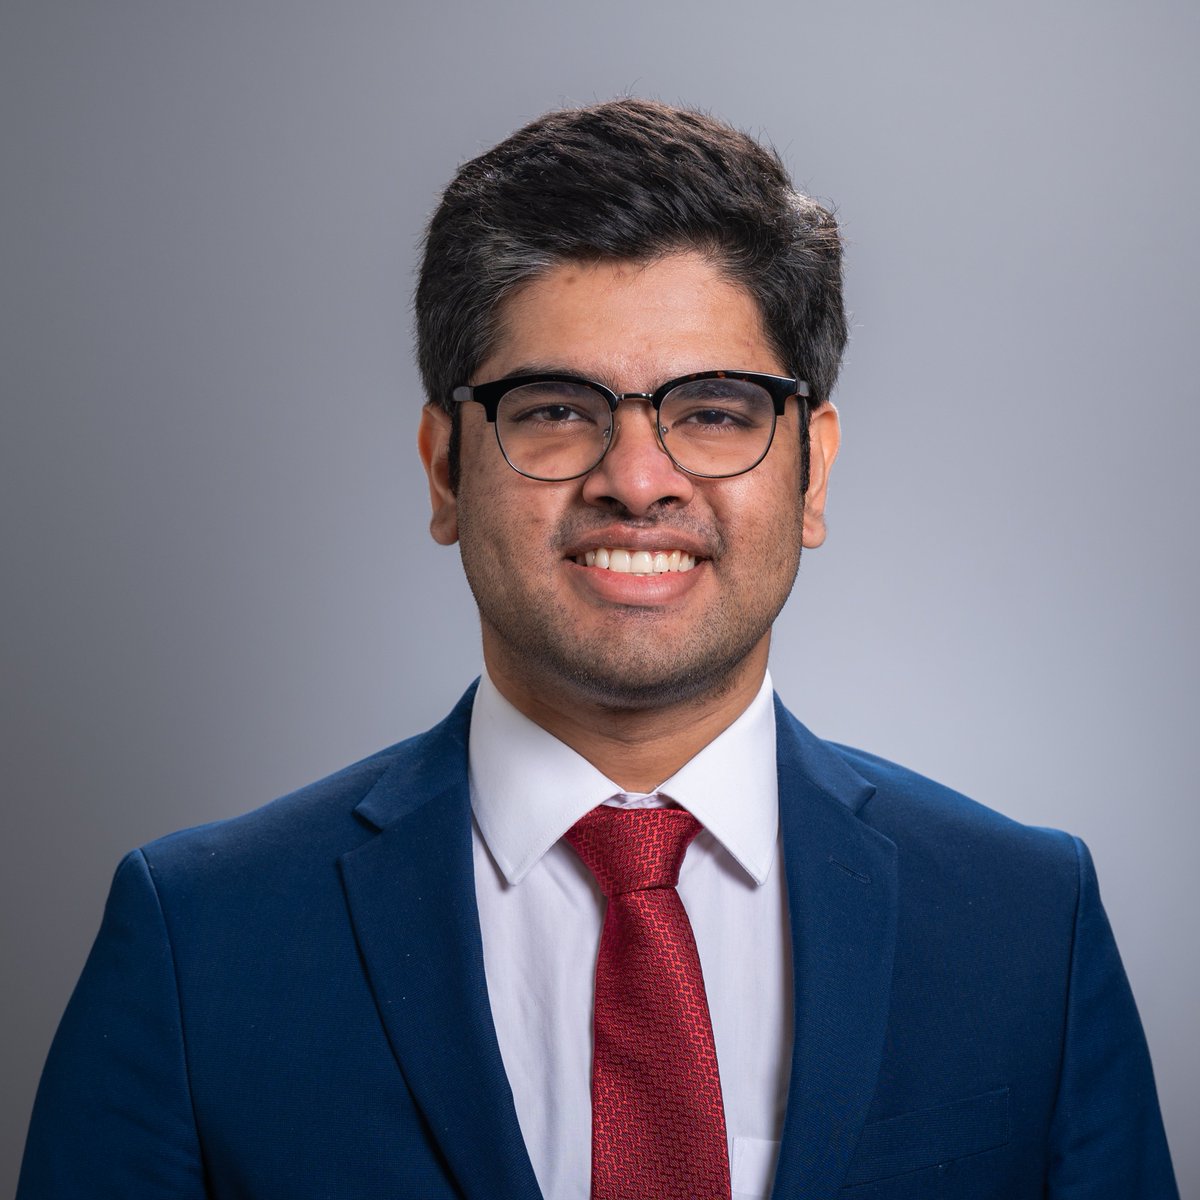 Dr. @NamanShetty96 publishes a landmark study in @CircHF highlighting the sex differences in clinical outcomes among LVAD-receiving end-stage heart failure patients.

@GarimaAroraMD @NicoleLohrMD @UABNews @UABCVI @UABCardiology @uabmedicine @UABDeptMed 

ahajournals.org/doi/abs/10.116…